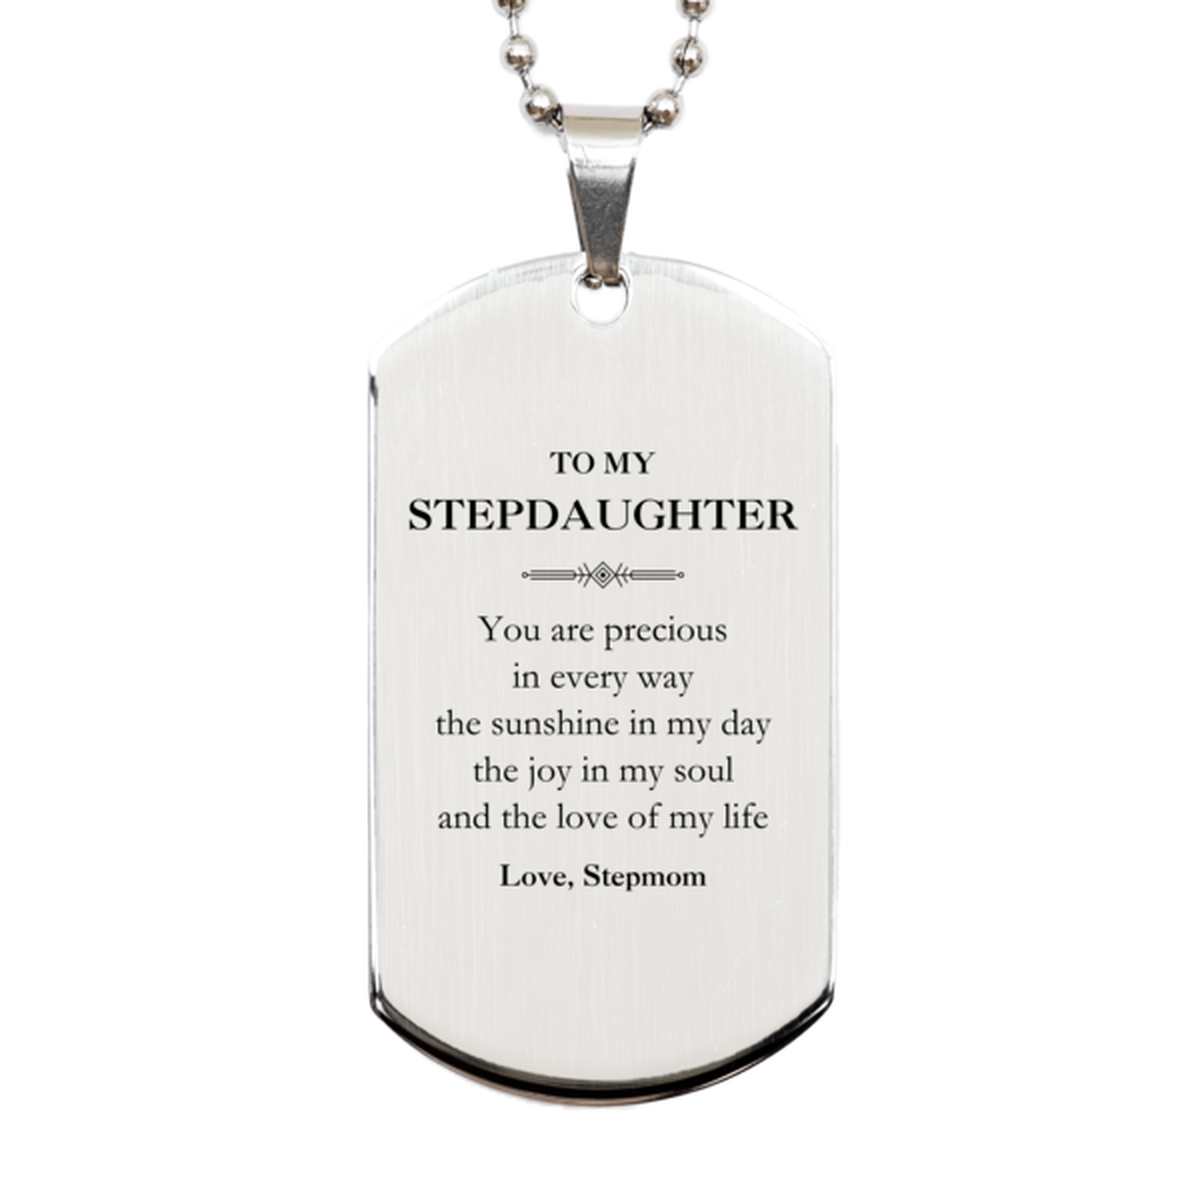 Graduation Gifts for Stepdaughter Silver Dog Tag Present from Stepmom, Christmas Stepdaughter Birthday Gifts Stepdaughter You are precious in every way the sunshine in my day. Love, Stepmom